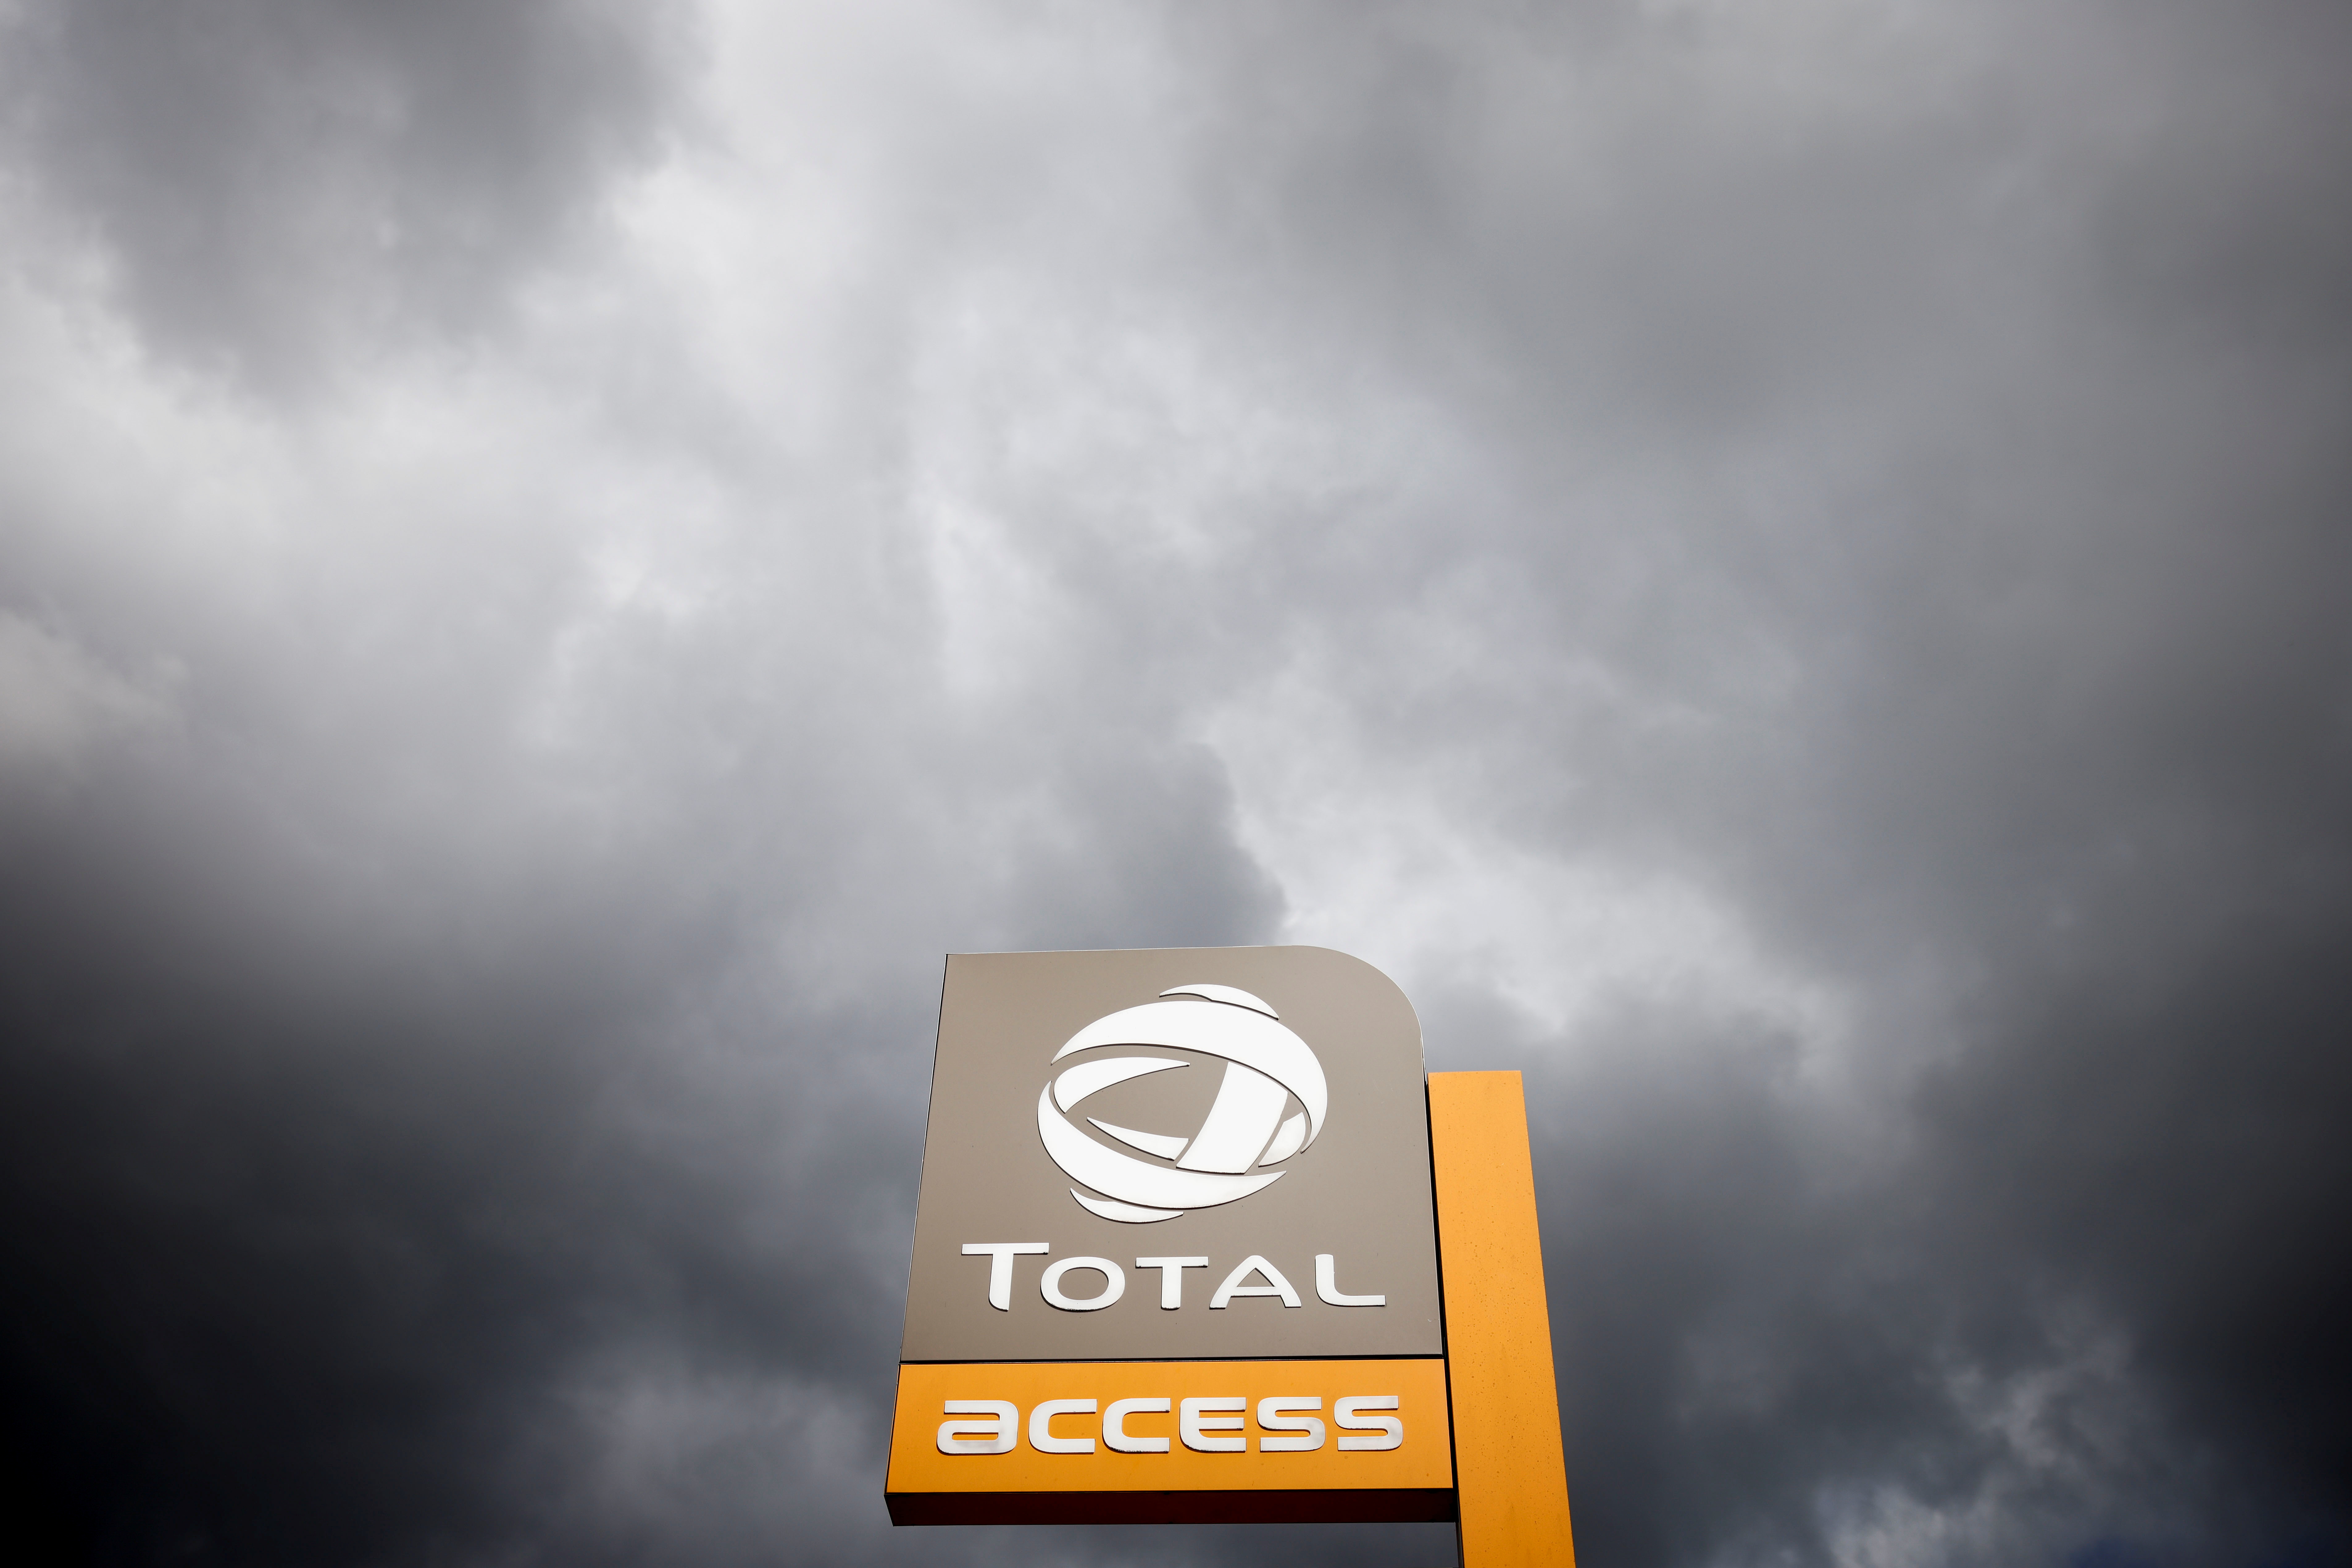 The logo of French oil and gas company Total is pictured at a petrol station in Vertou